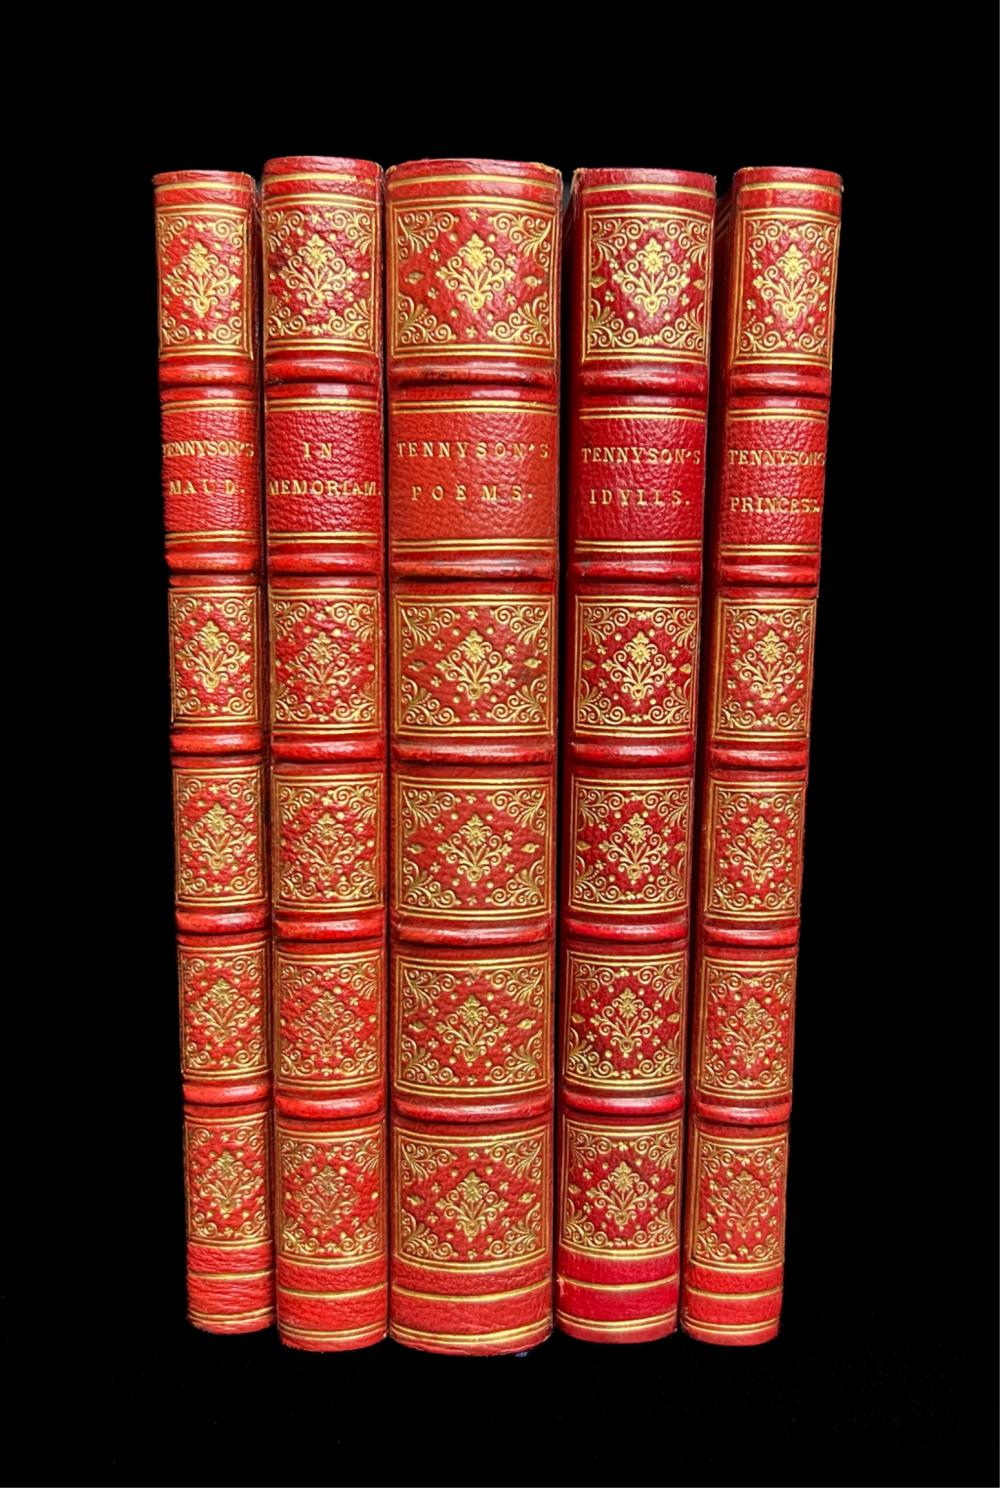 GROUP, 5 BOOKS BY ALFRED TENNYSONTennyson's